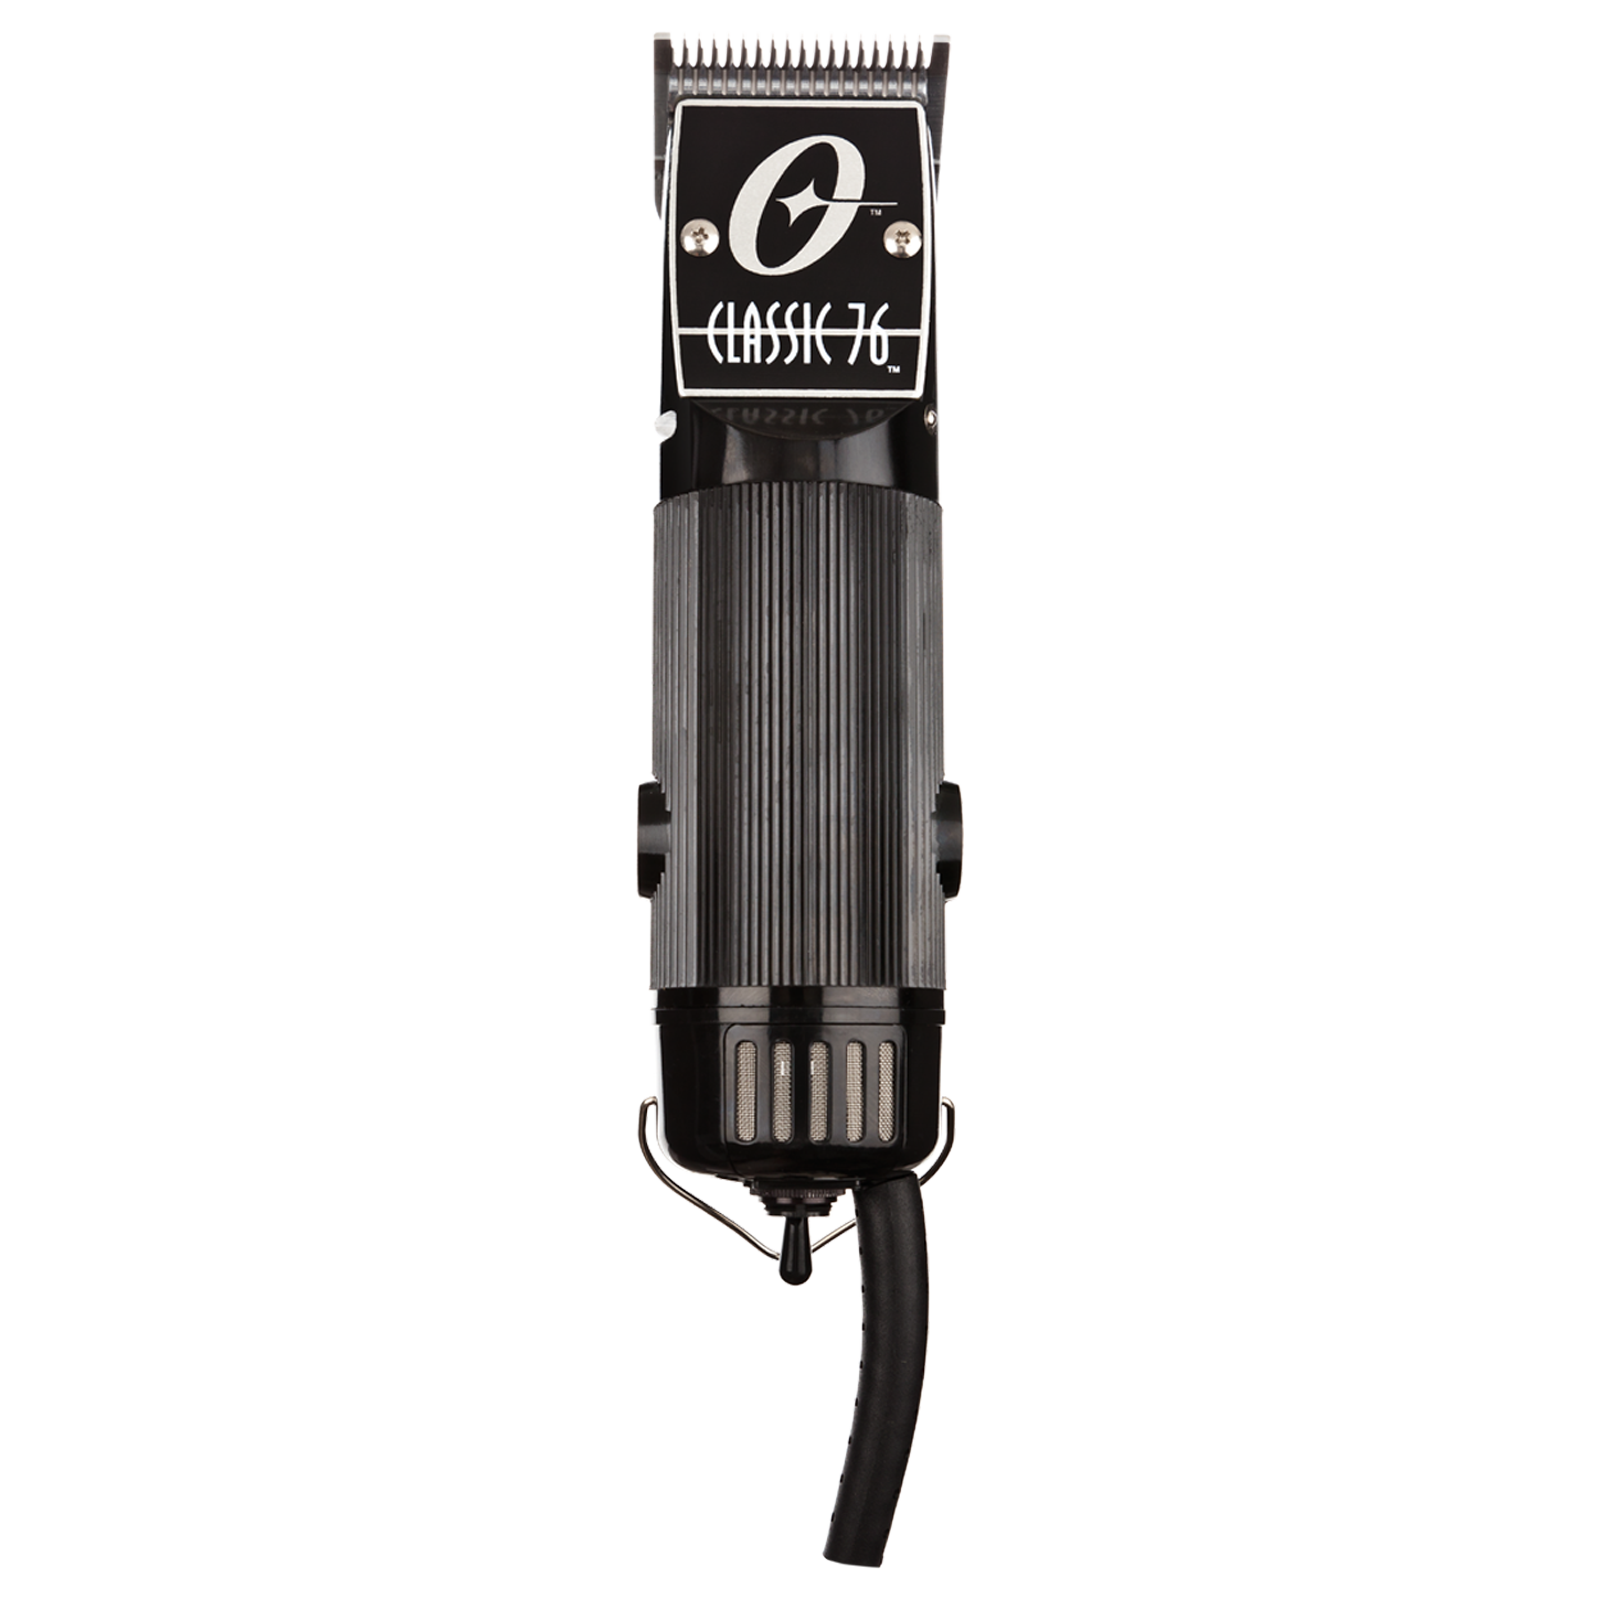 oster body clippers